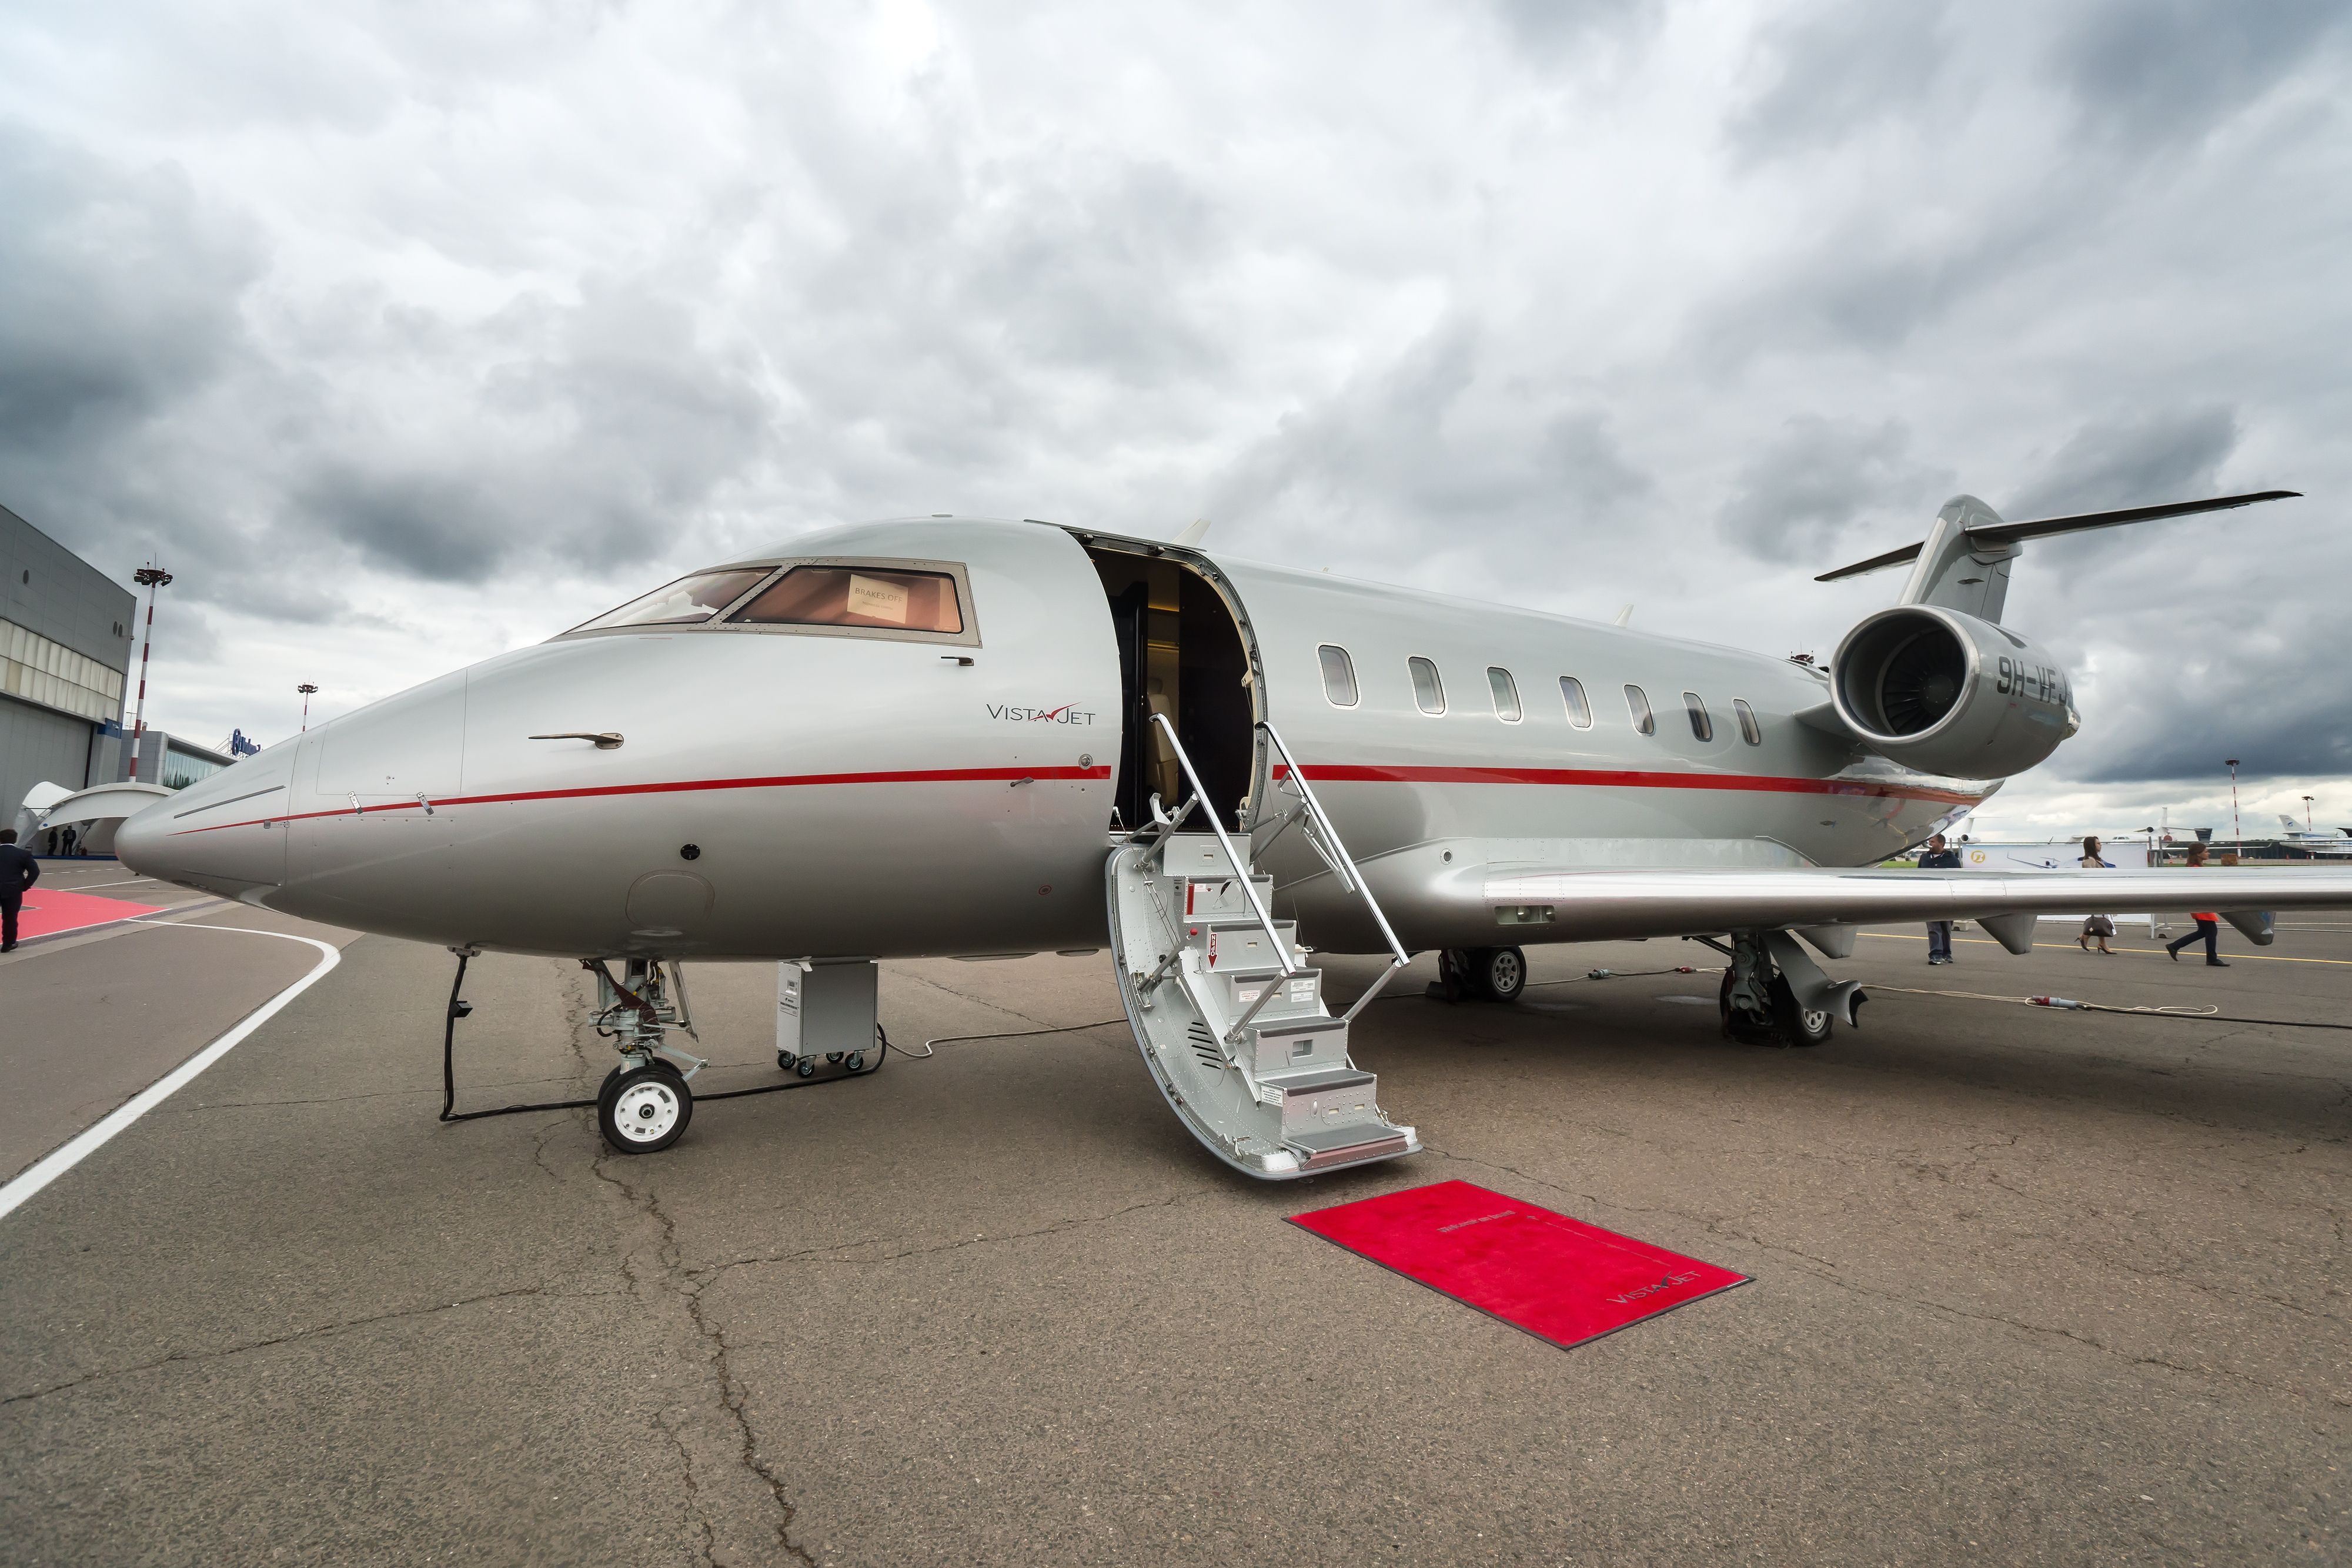 Private Jet By Media Works From Shutterstock 